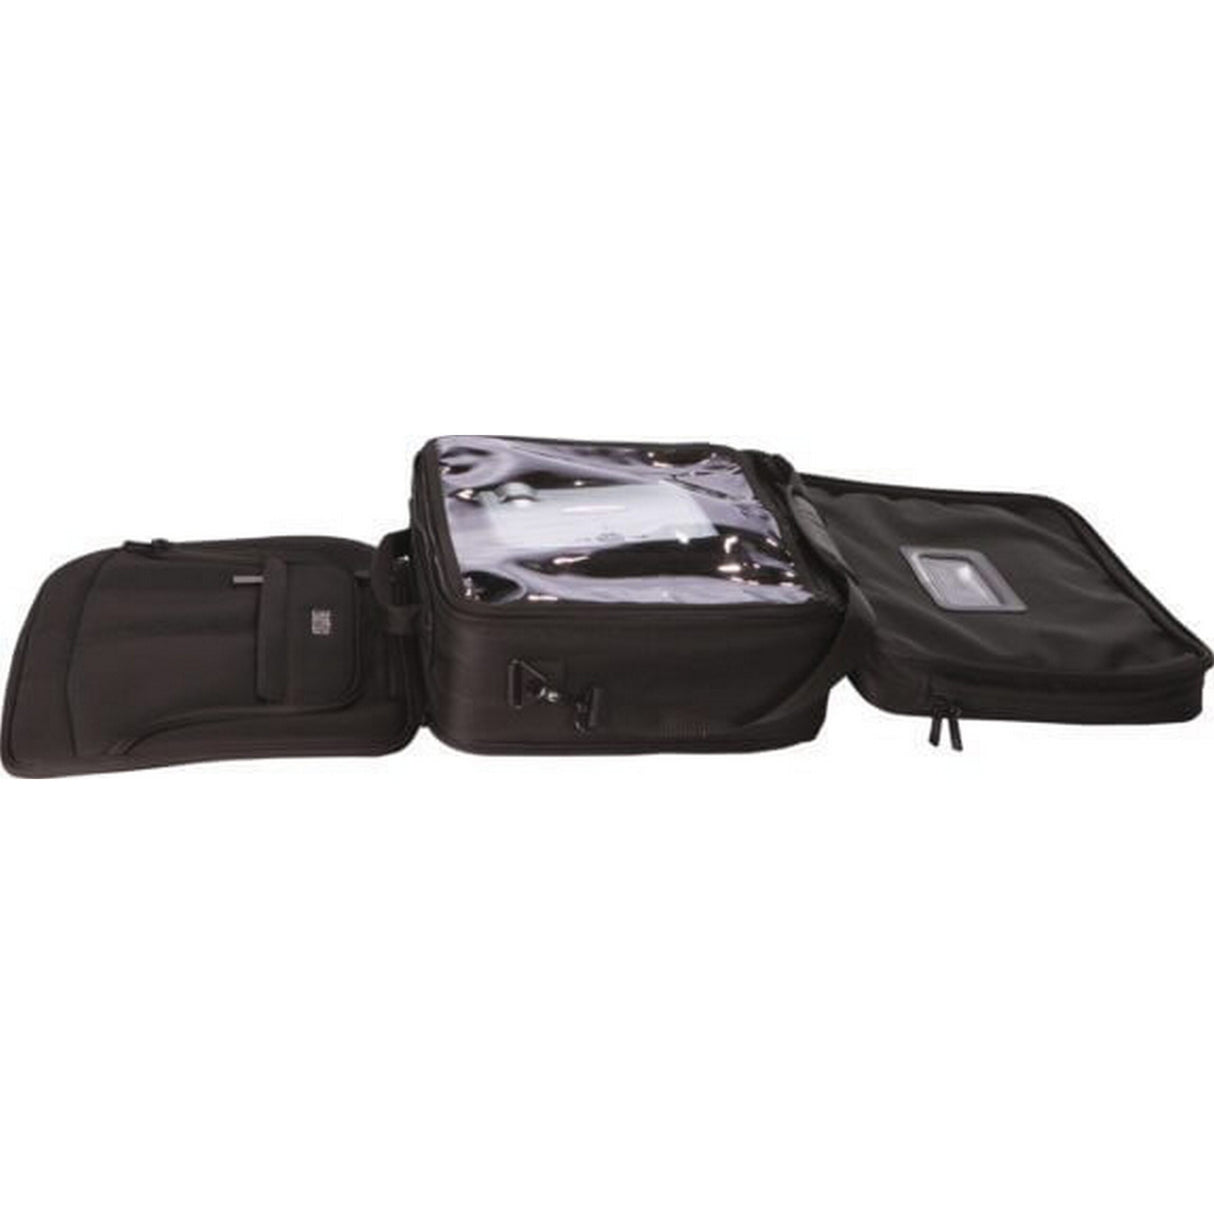 Gator GAV-LTOFFICE Checkpoint Friendly Laptop and Projector Bag